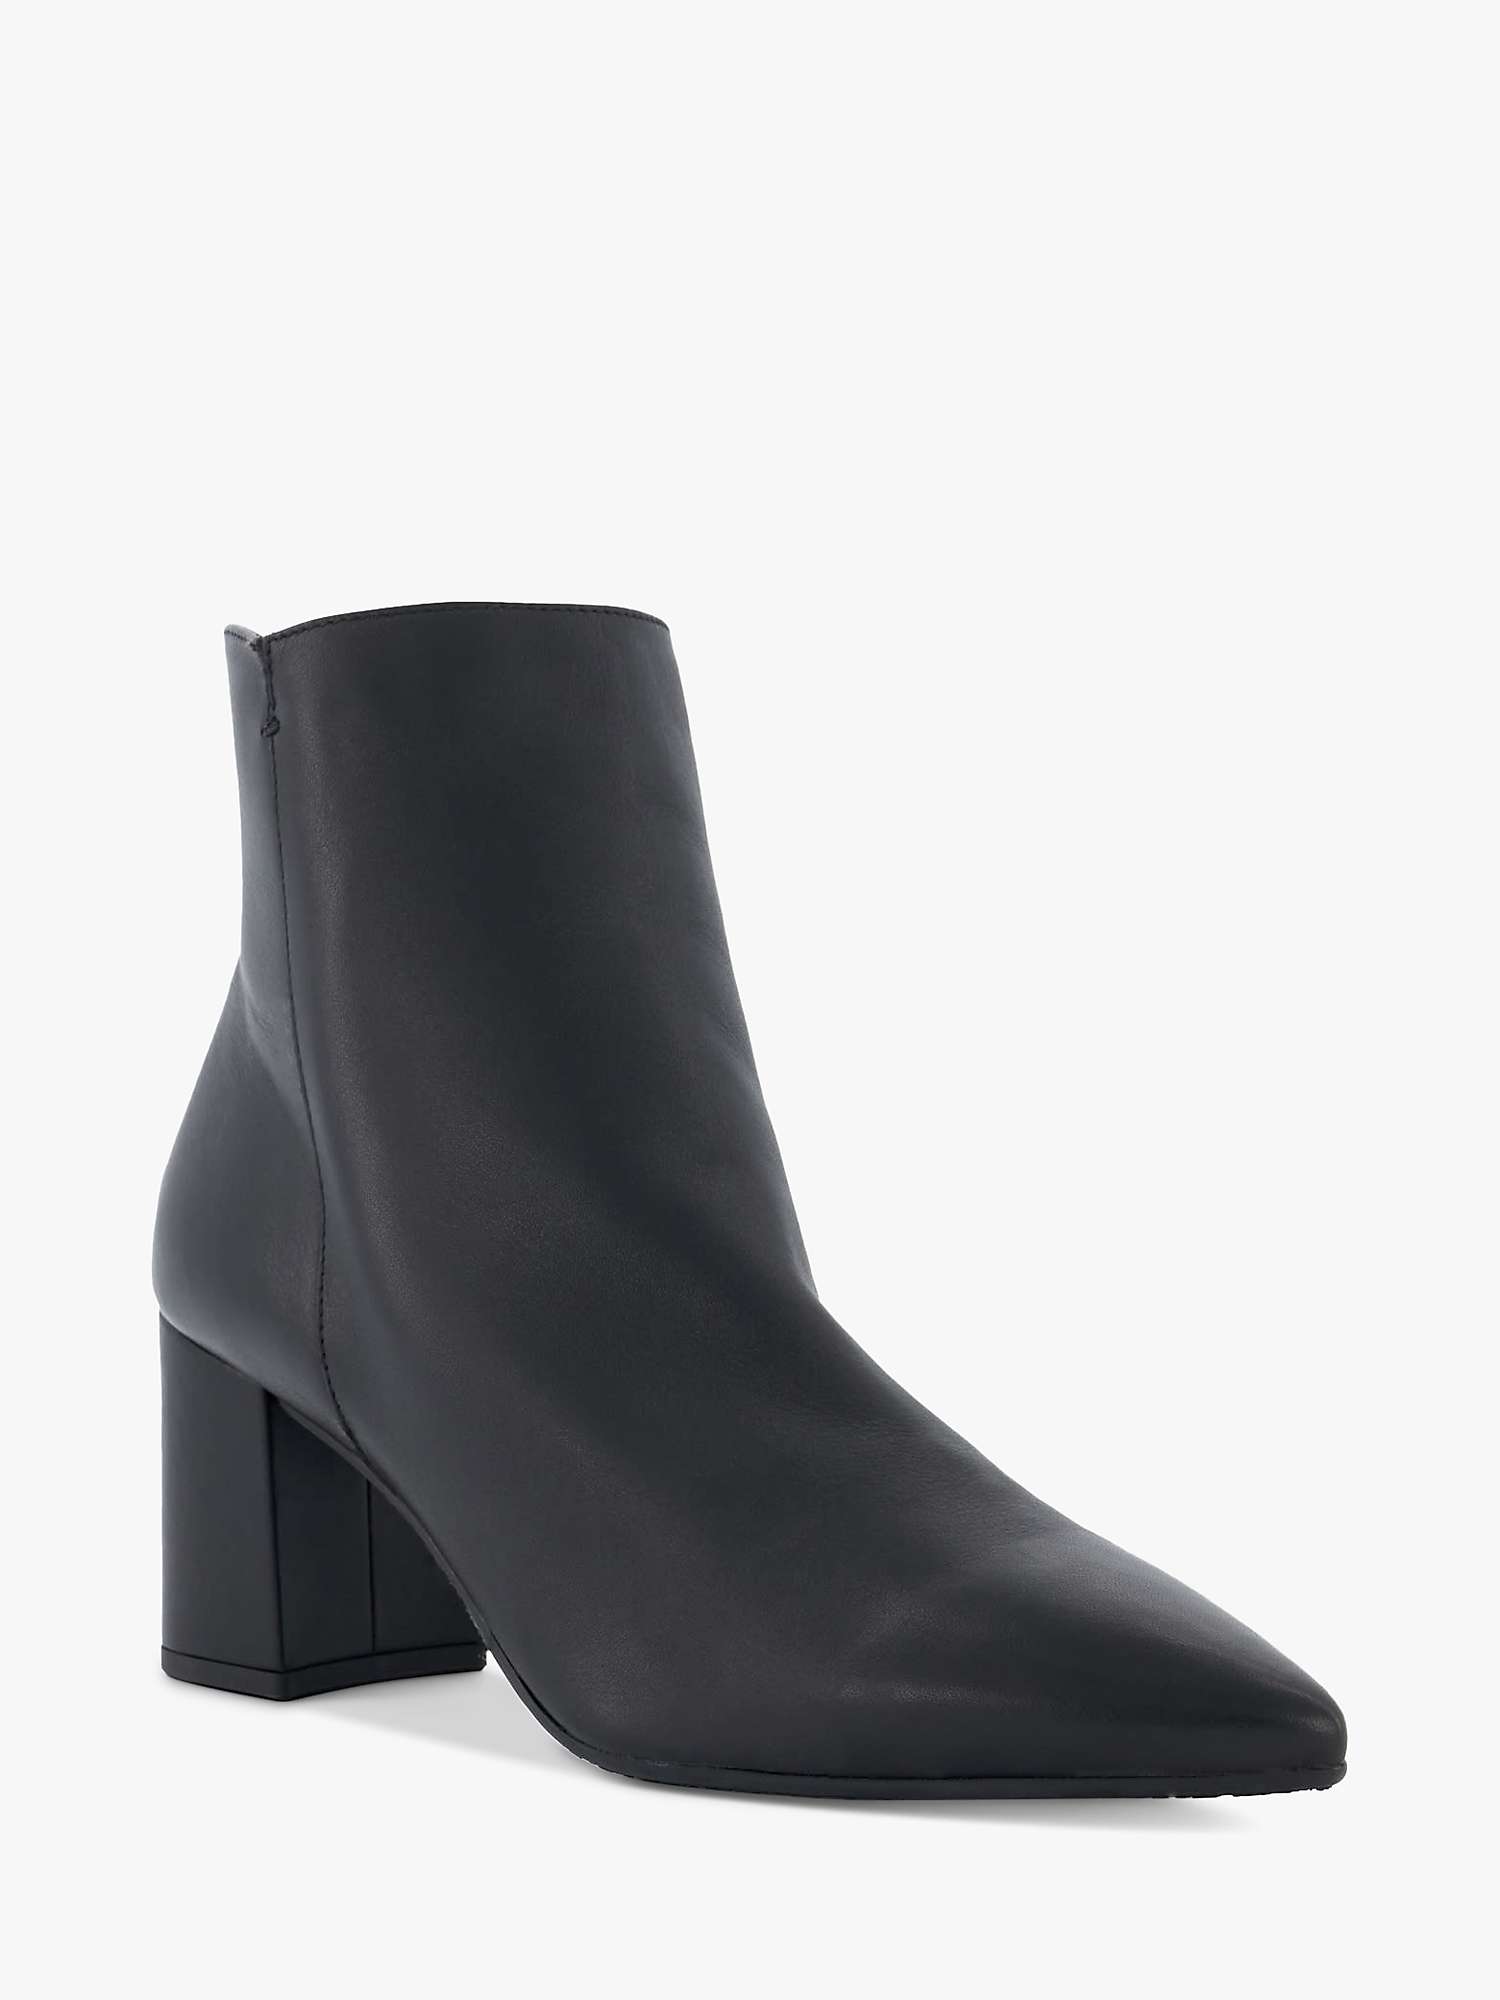 Dune Olexa Pointed Leather Boots, Black at John Lewis & Partners